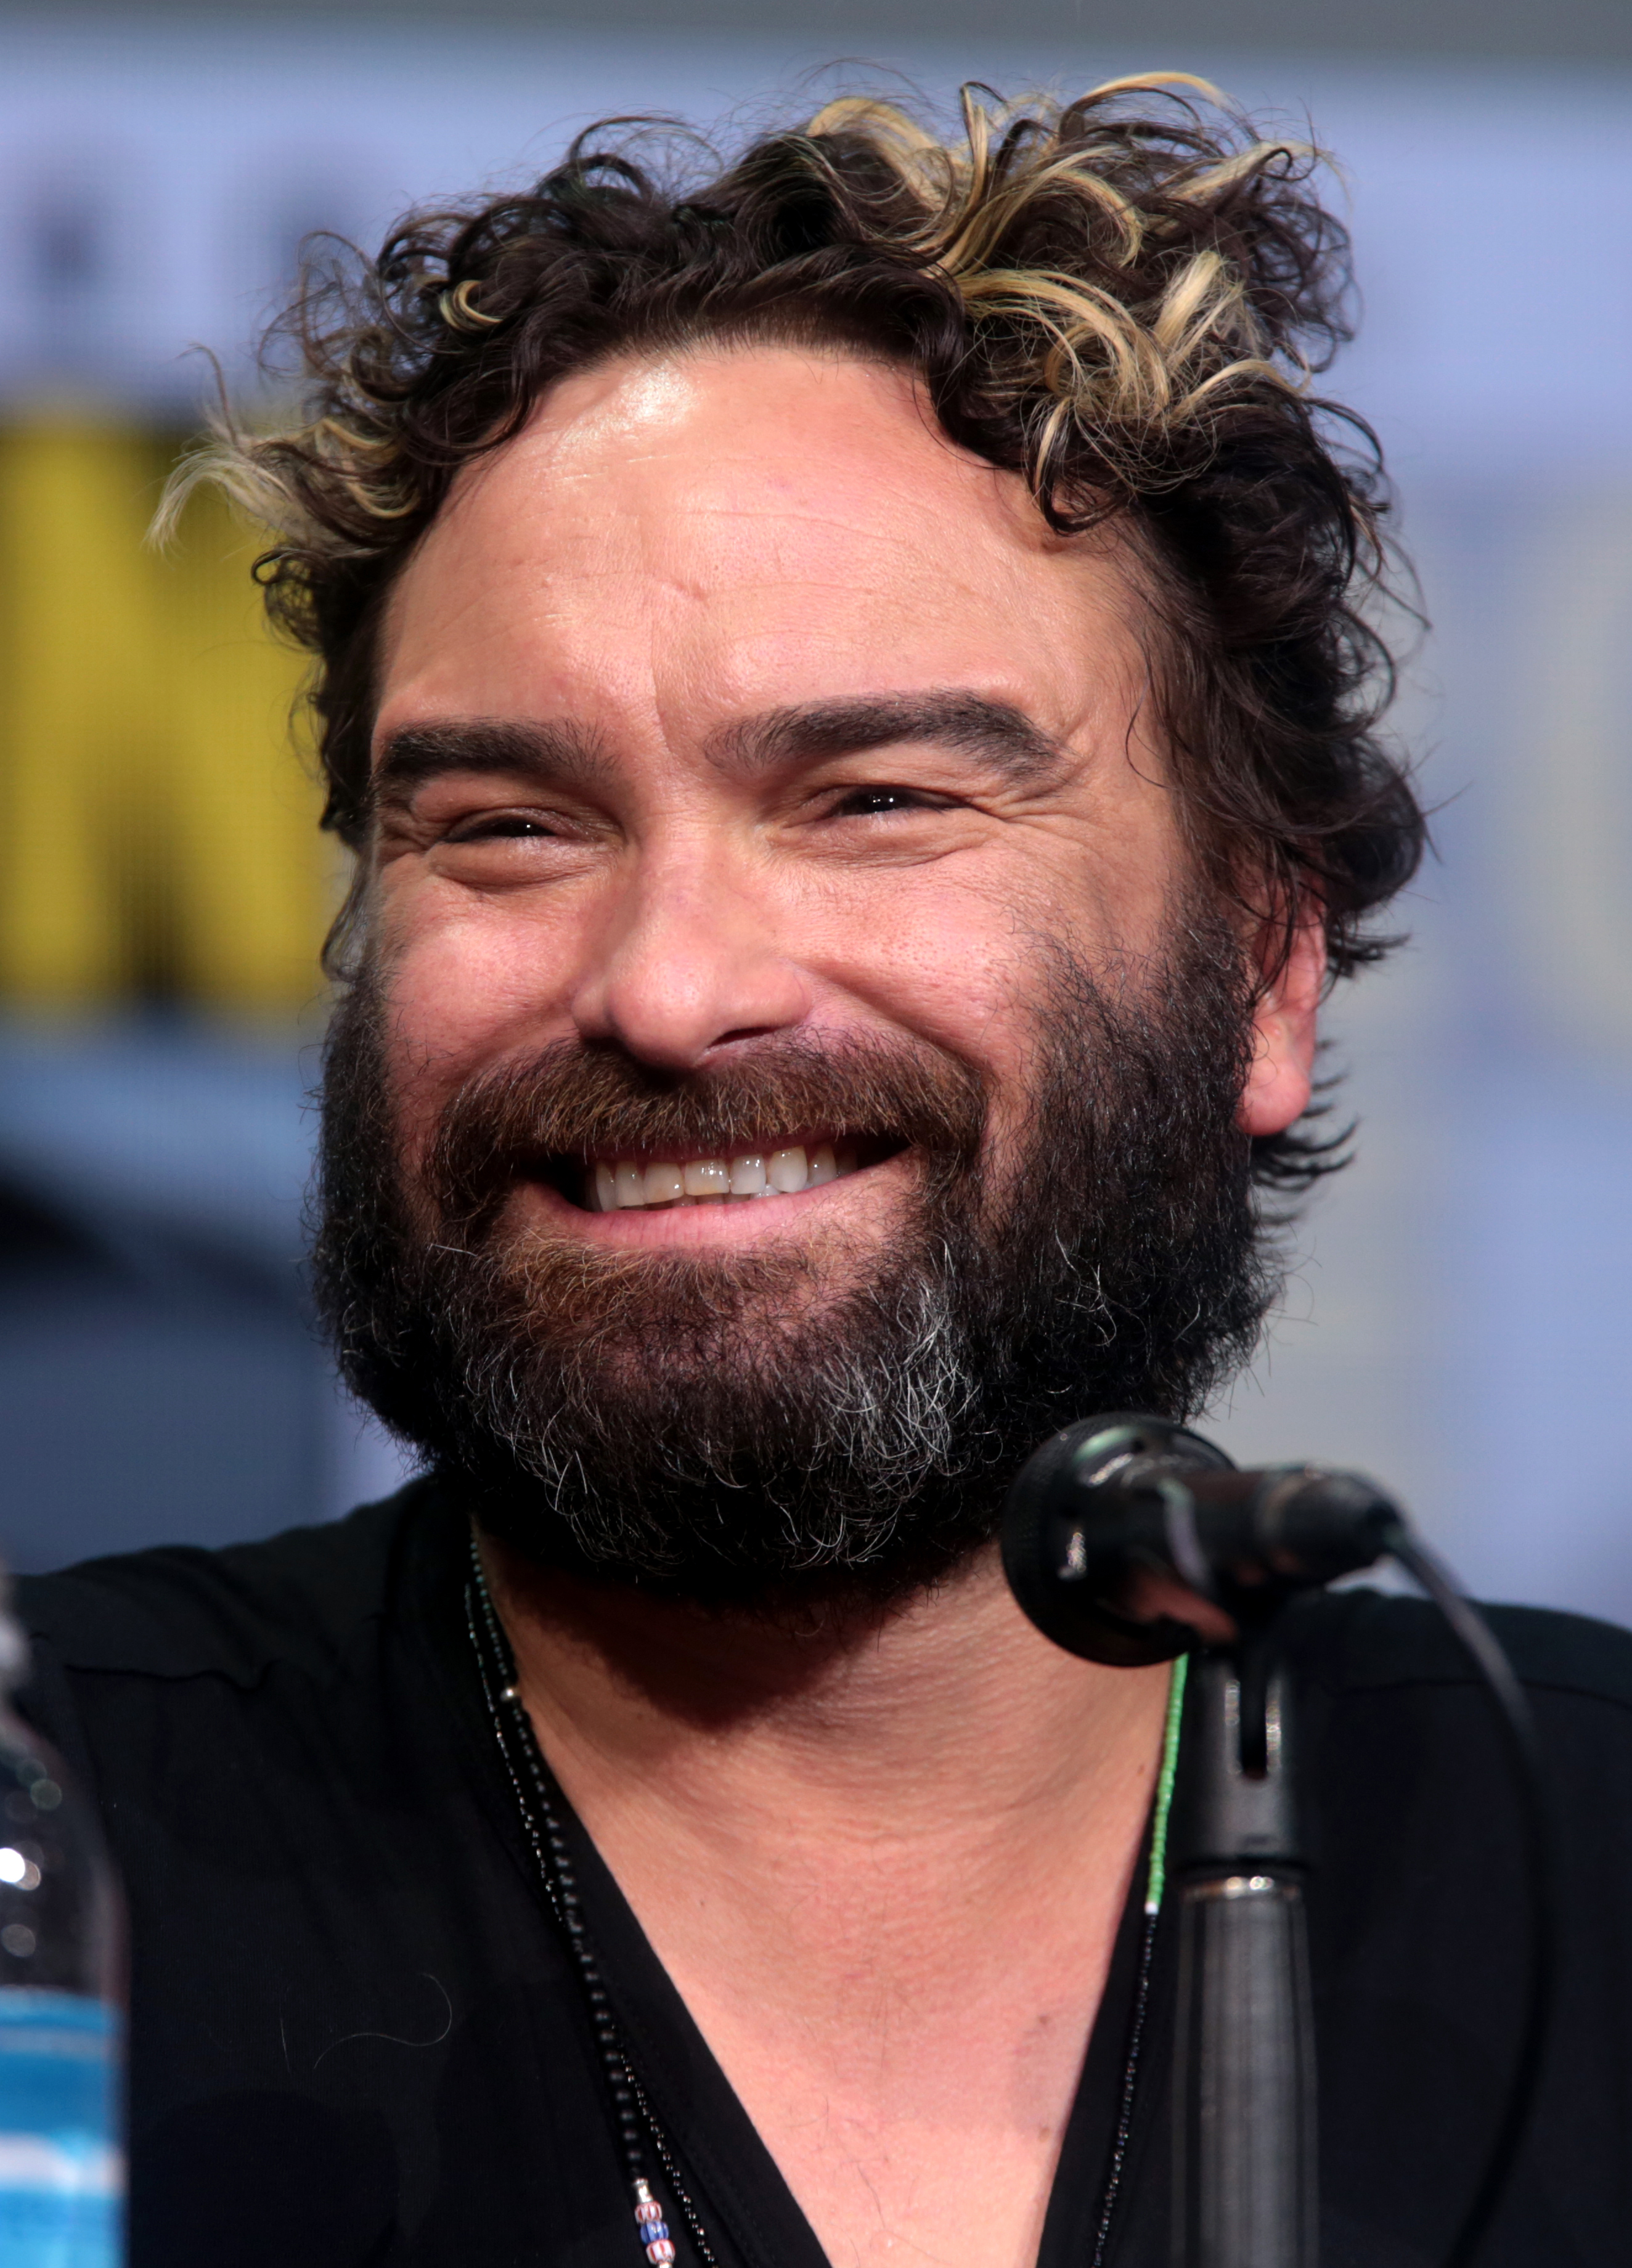 Married galecki to who johnny is Yahoo is